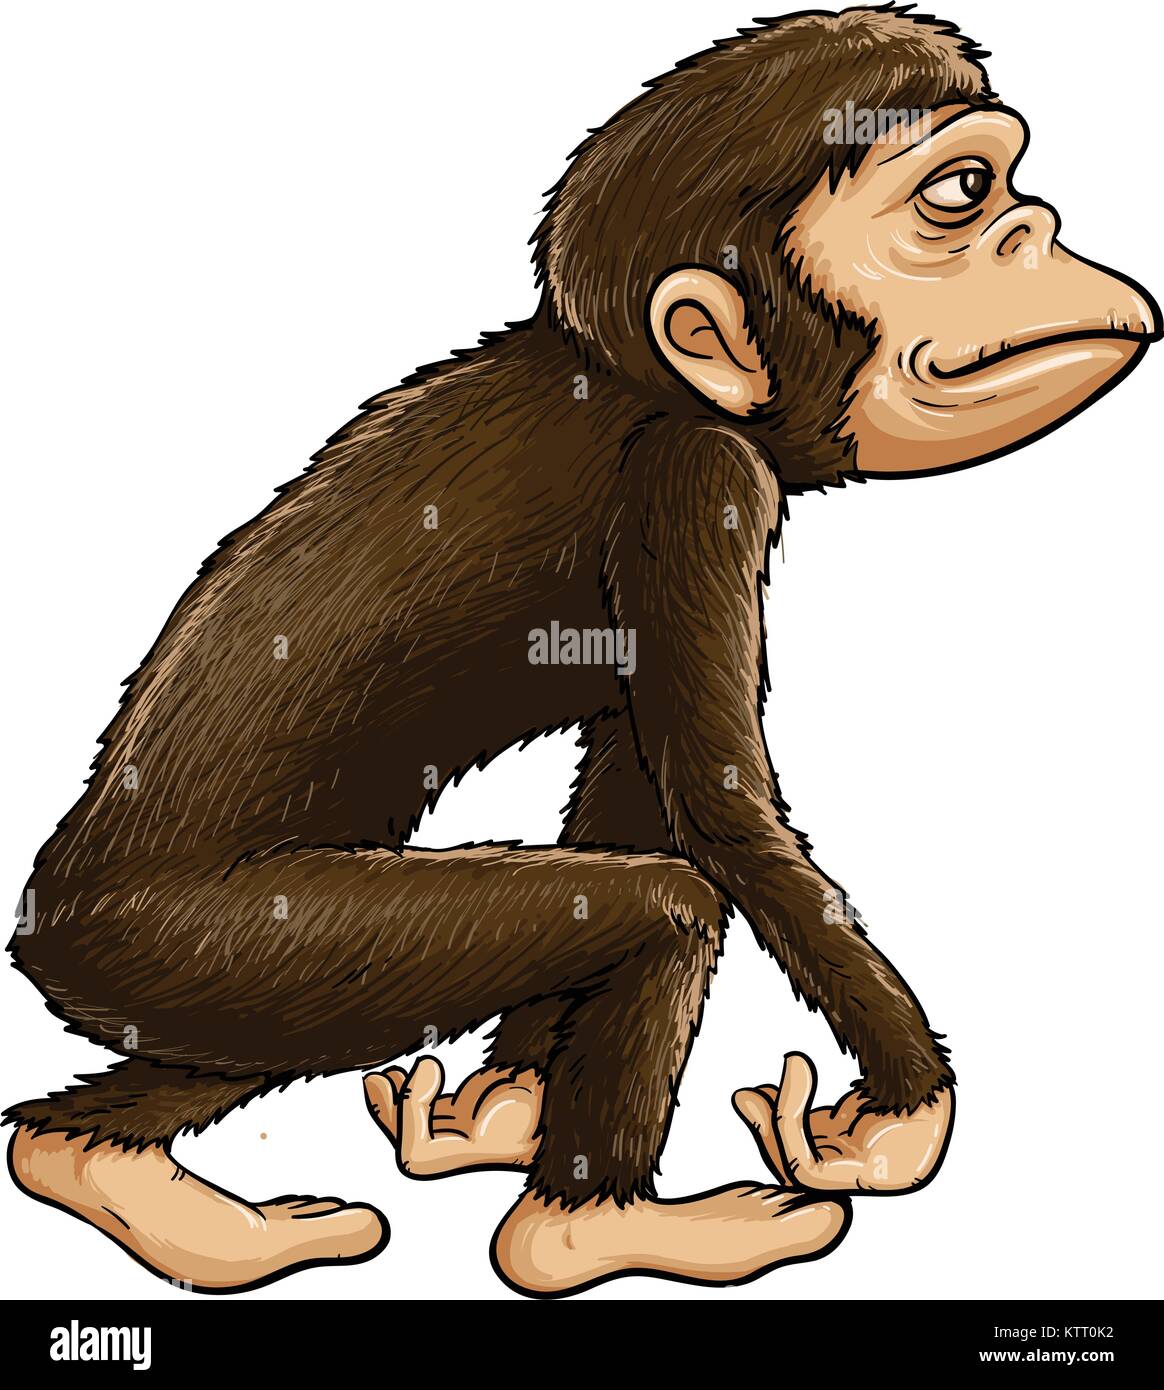 Illustration of early man from evolution series Stock Vector